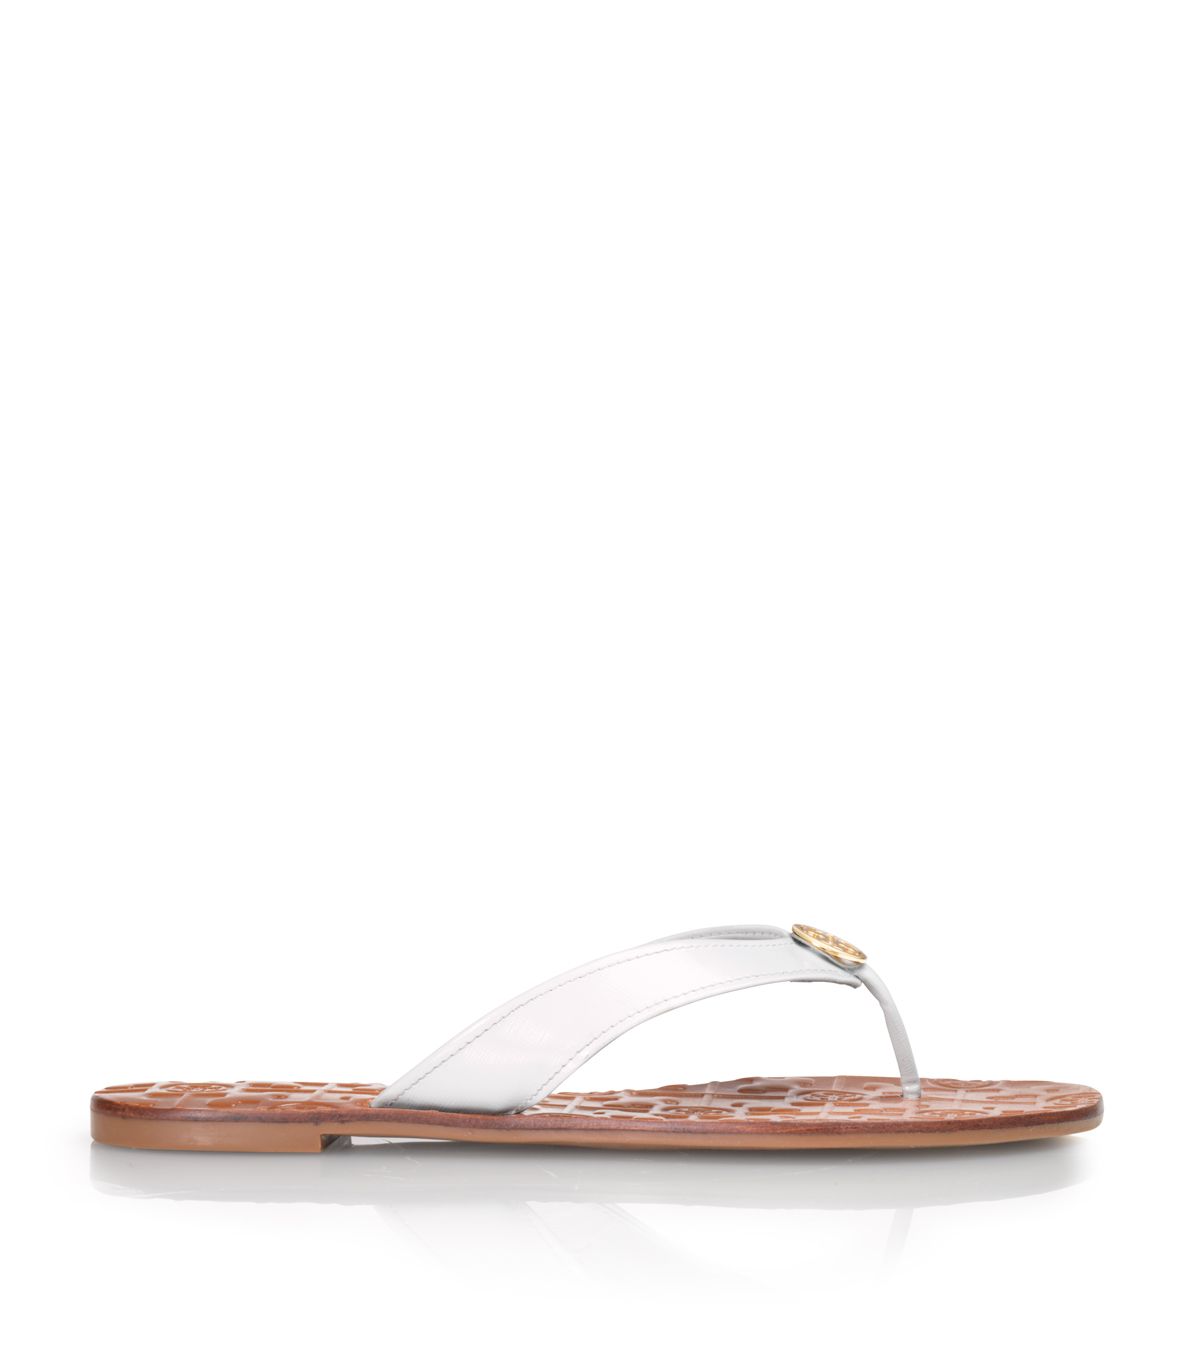 Tory burch Patent Leather Thora Sandal in White | Lyst